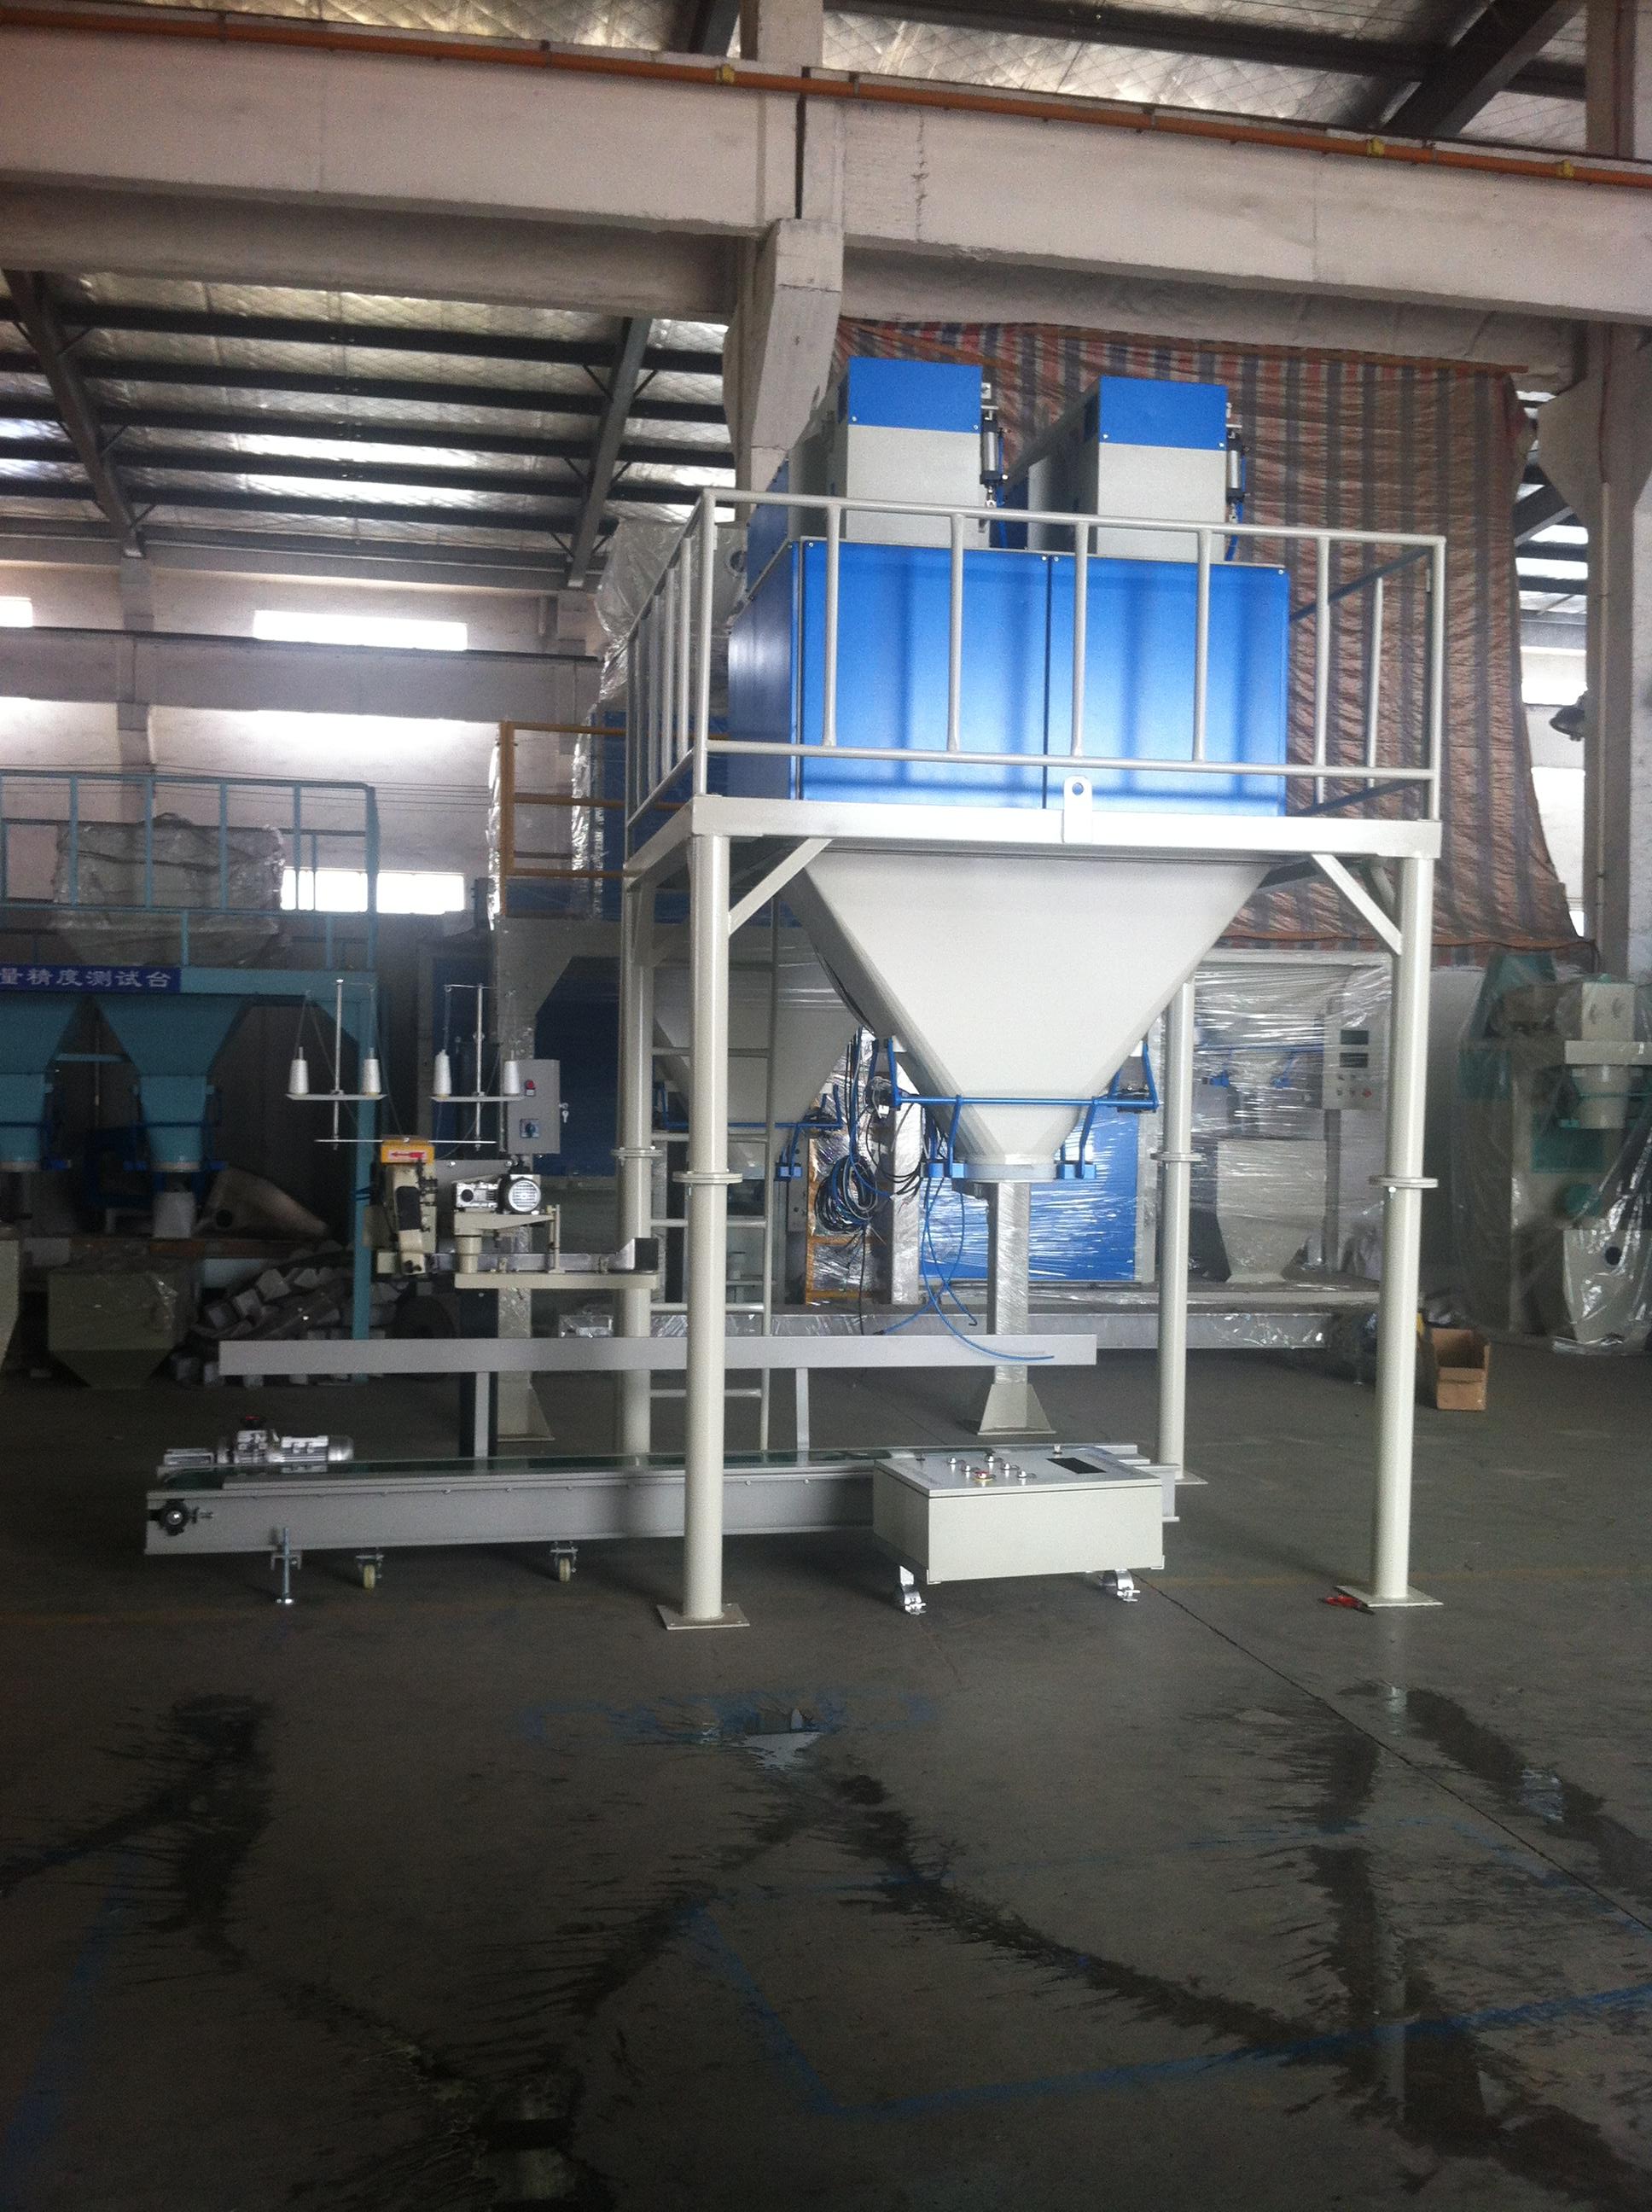 Lump Charcoal Packing Machines Acid Powder Packing Machine 700bags compost bagging line Mineral Premix Bagging Machine Full automatic valve bagger with bag placer 25kg Mineral Powder Bagging Machine S